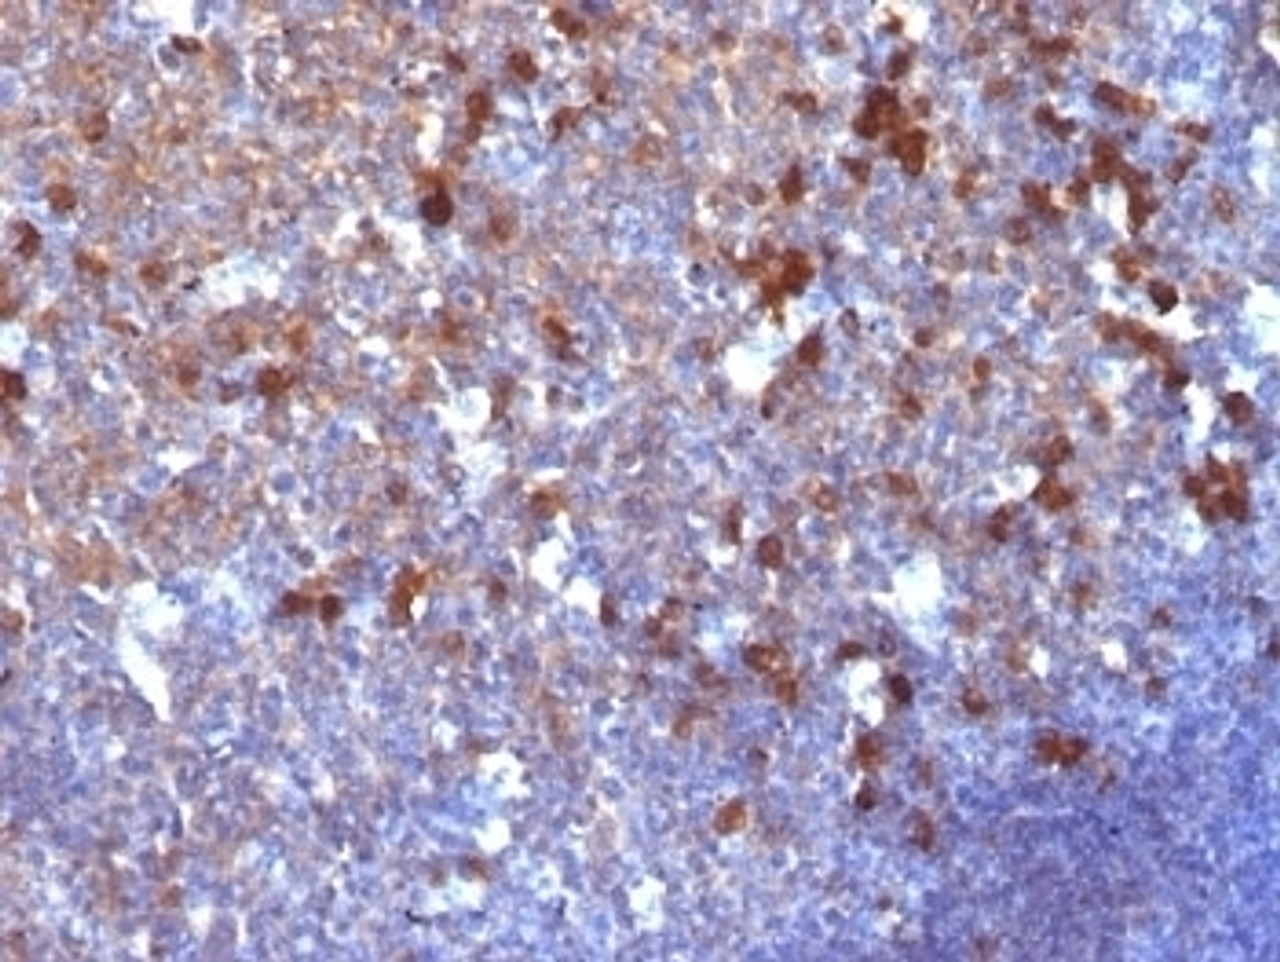 Formalin-fixed, paraffin-embedded human tonsil stained with IgG antibody (IG217)